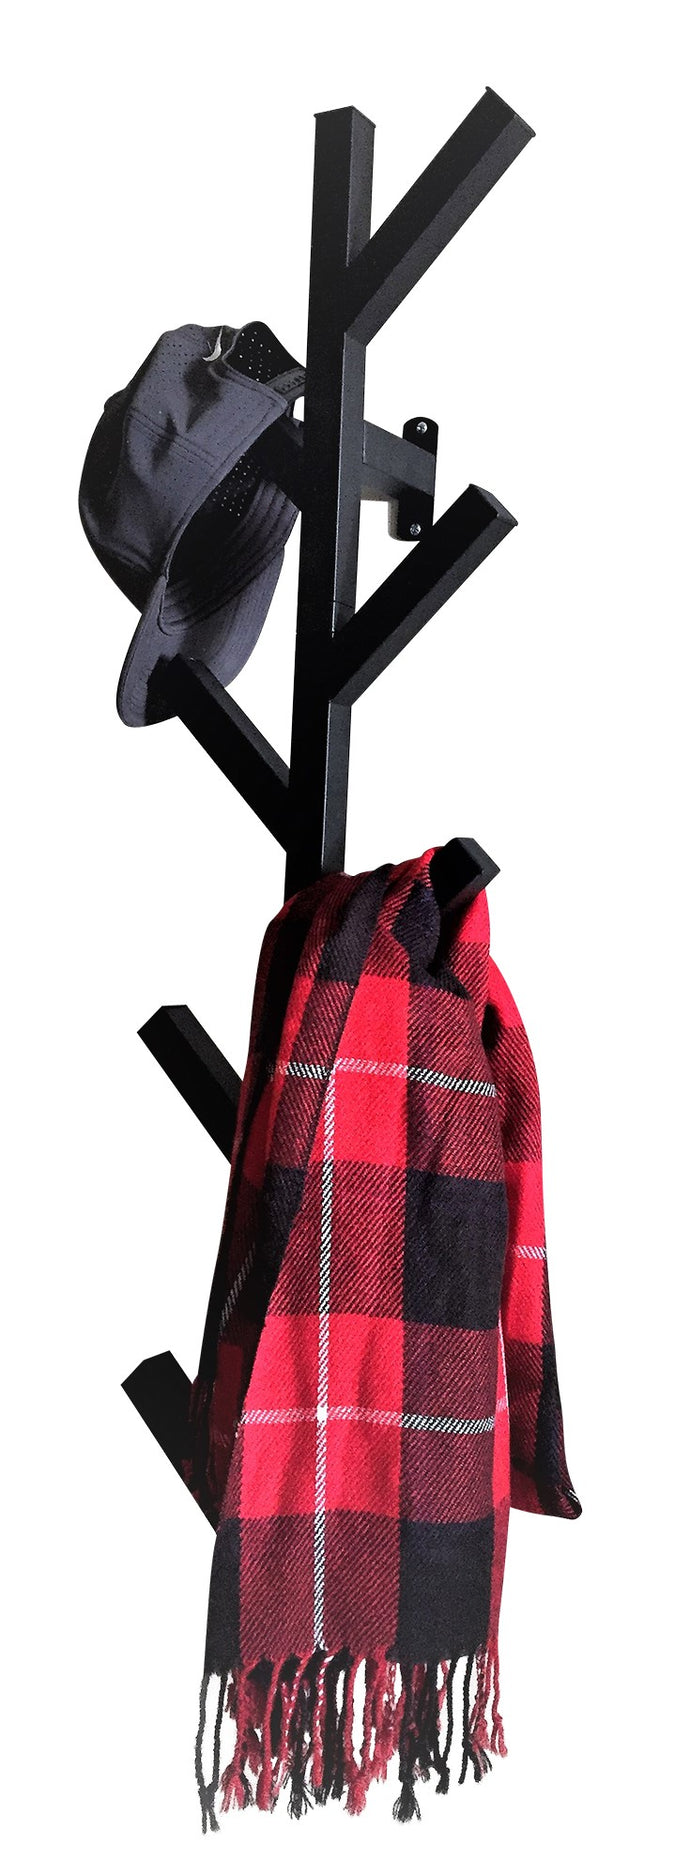 Another New Product! Meet our Mountable Coat Rack!